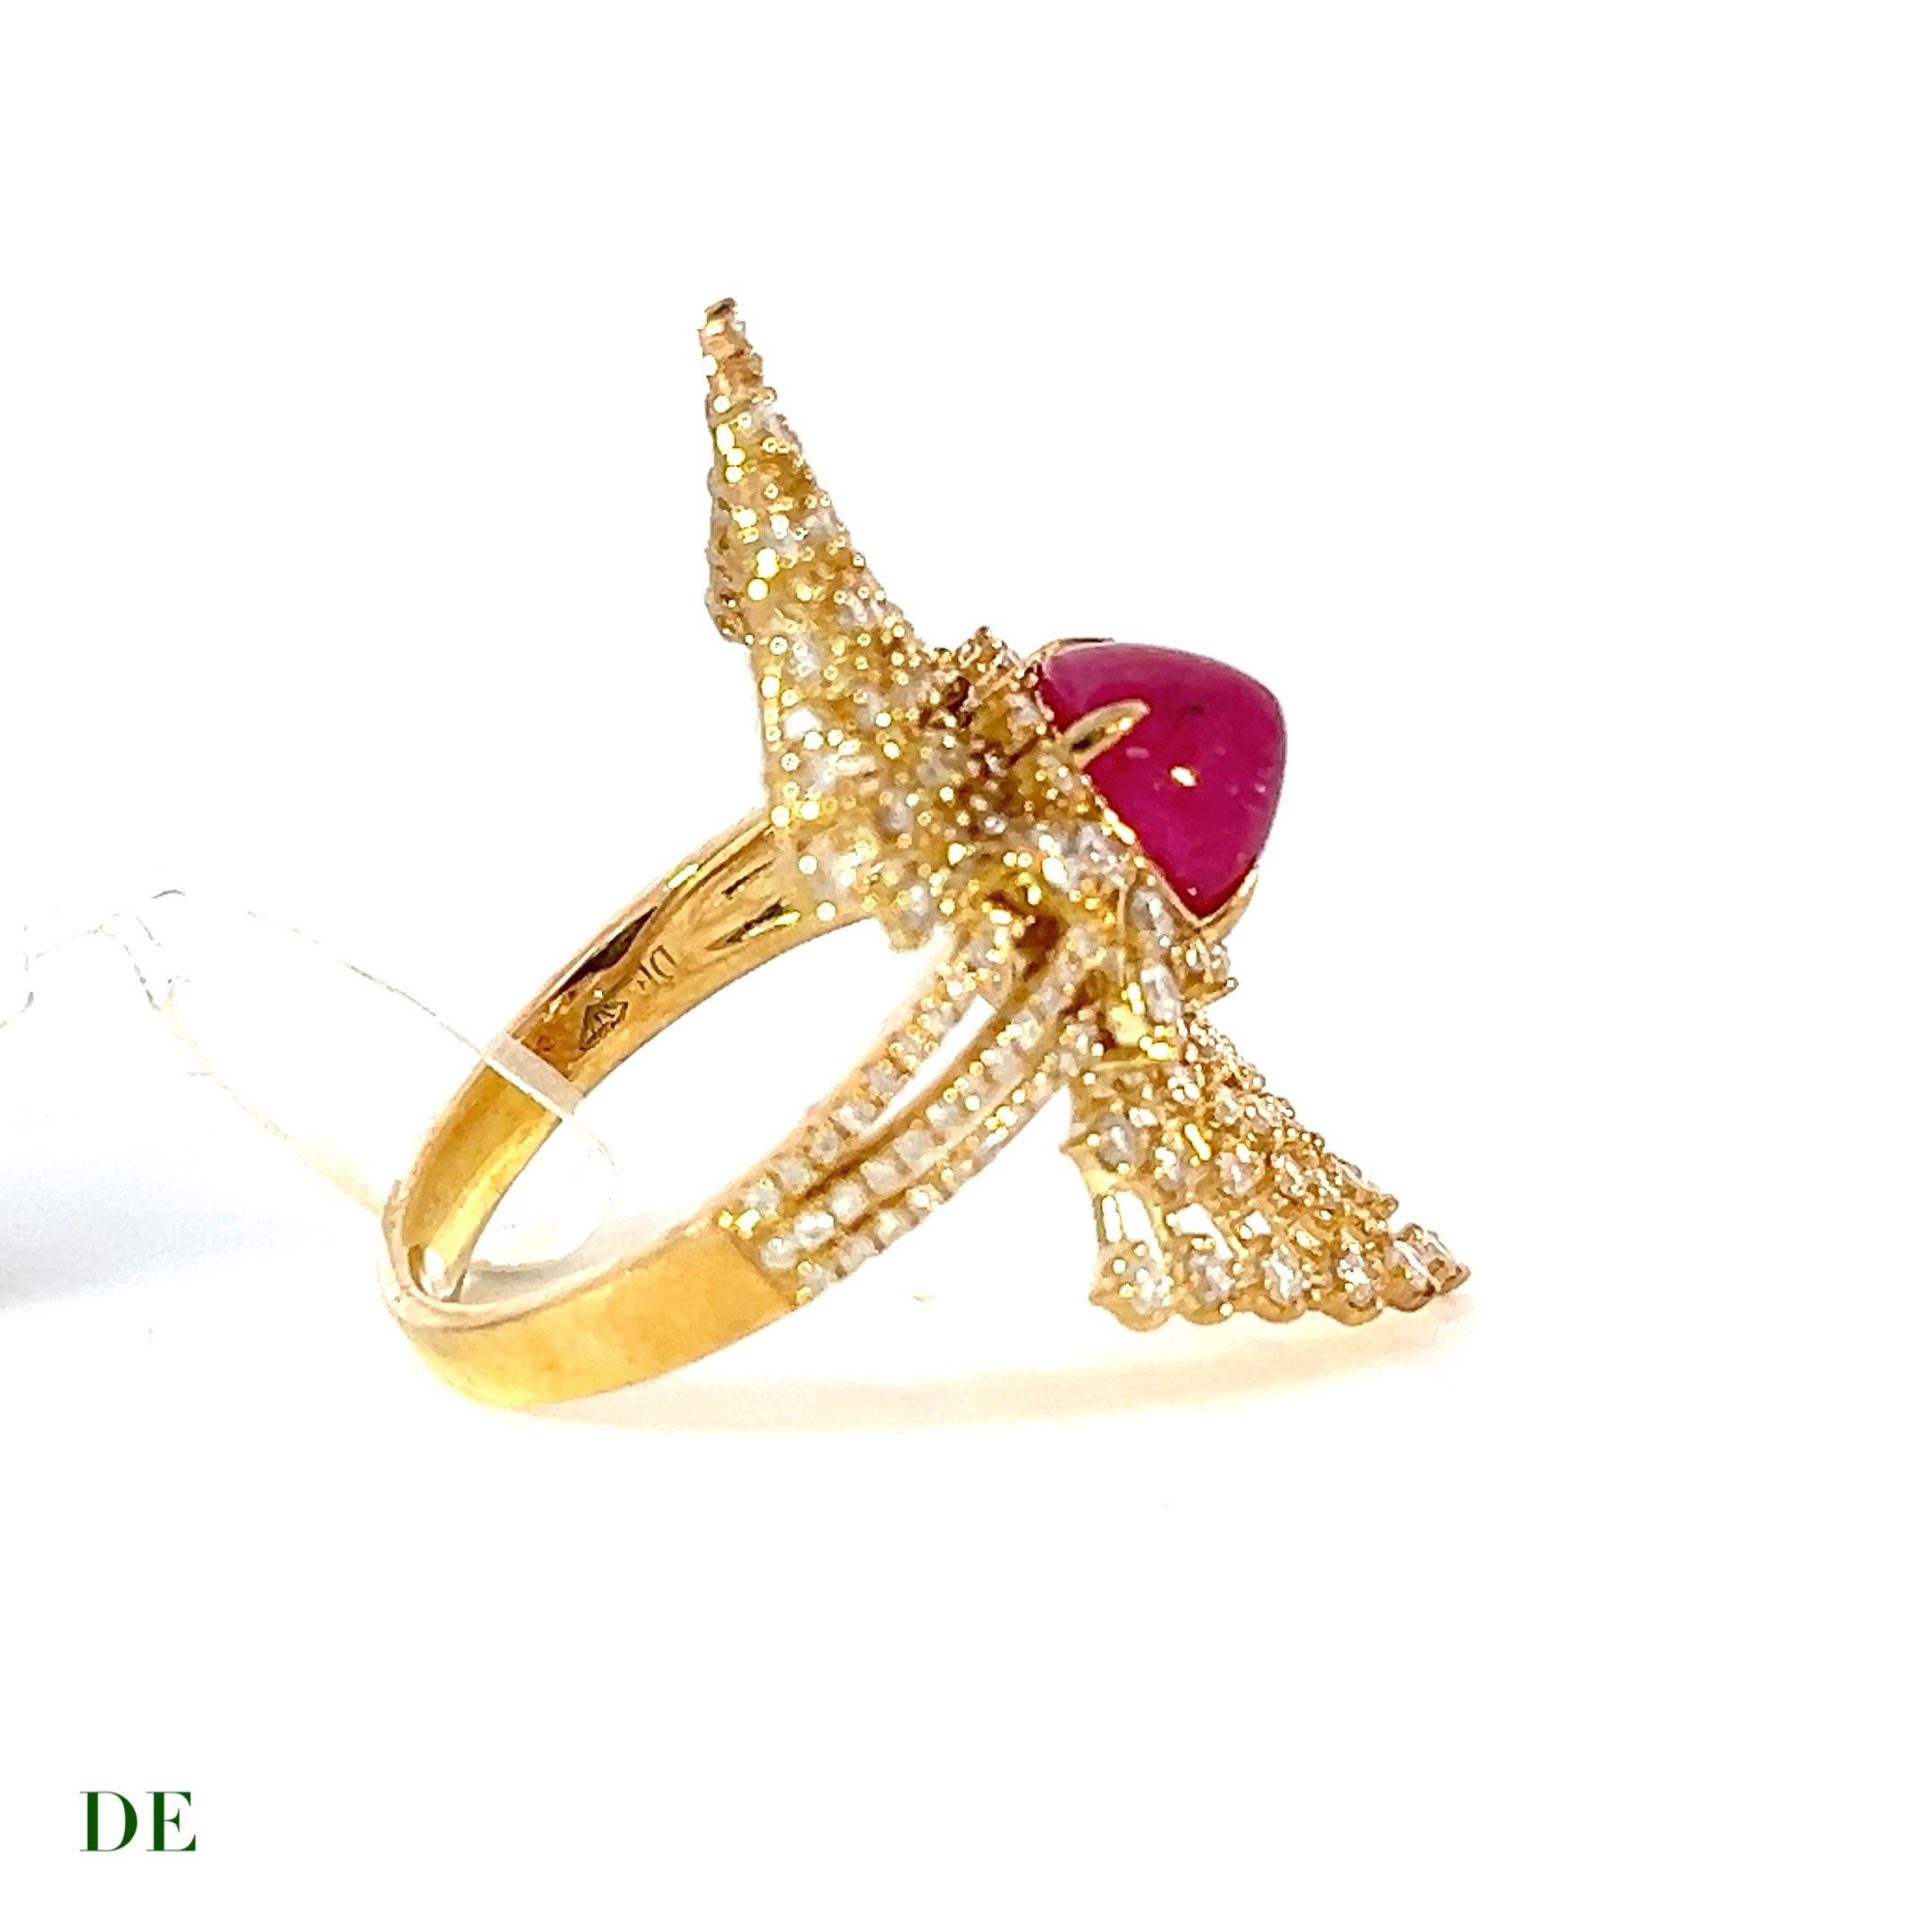 Elegant Firework Natural Cab Vivid Ruby 2.43 ct in 14k 1.17 ct Diamond Band Ring

Introducing the Elegant Firework Natural Cab Vivid Ruby and Diamond Band Ring, a mesmerizing piece that captures the essence of beauty and brilliance. This exquisite